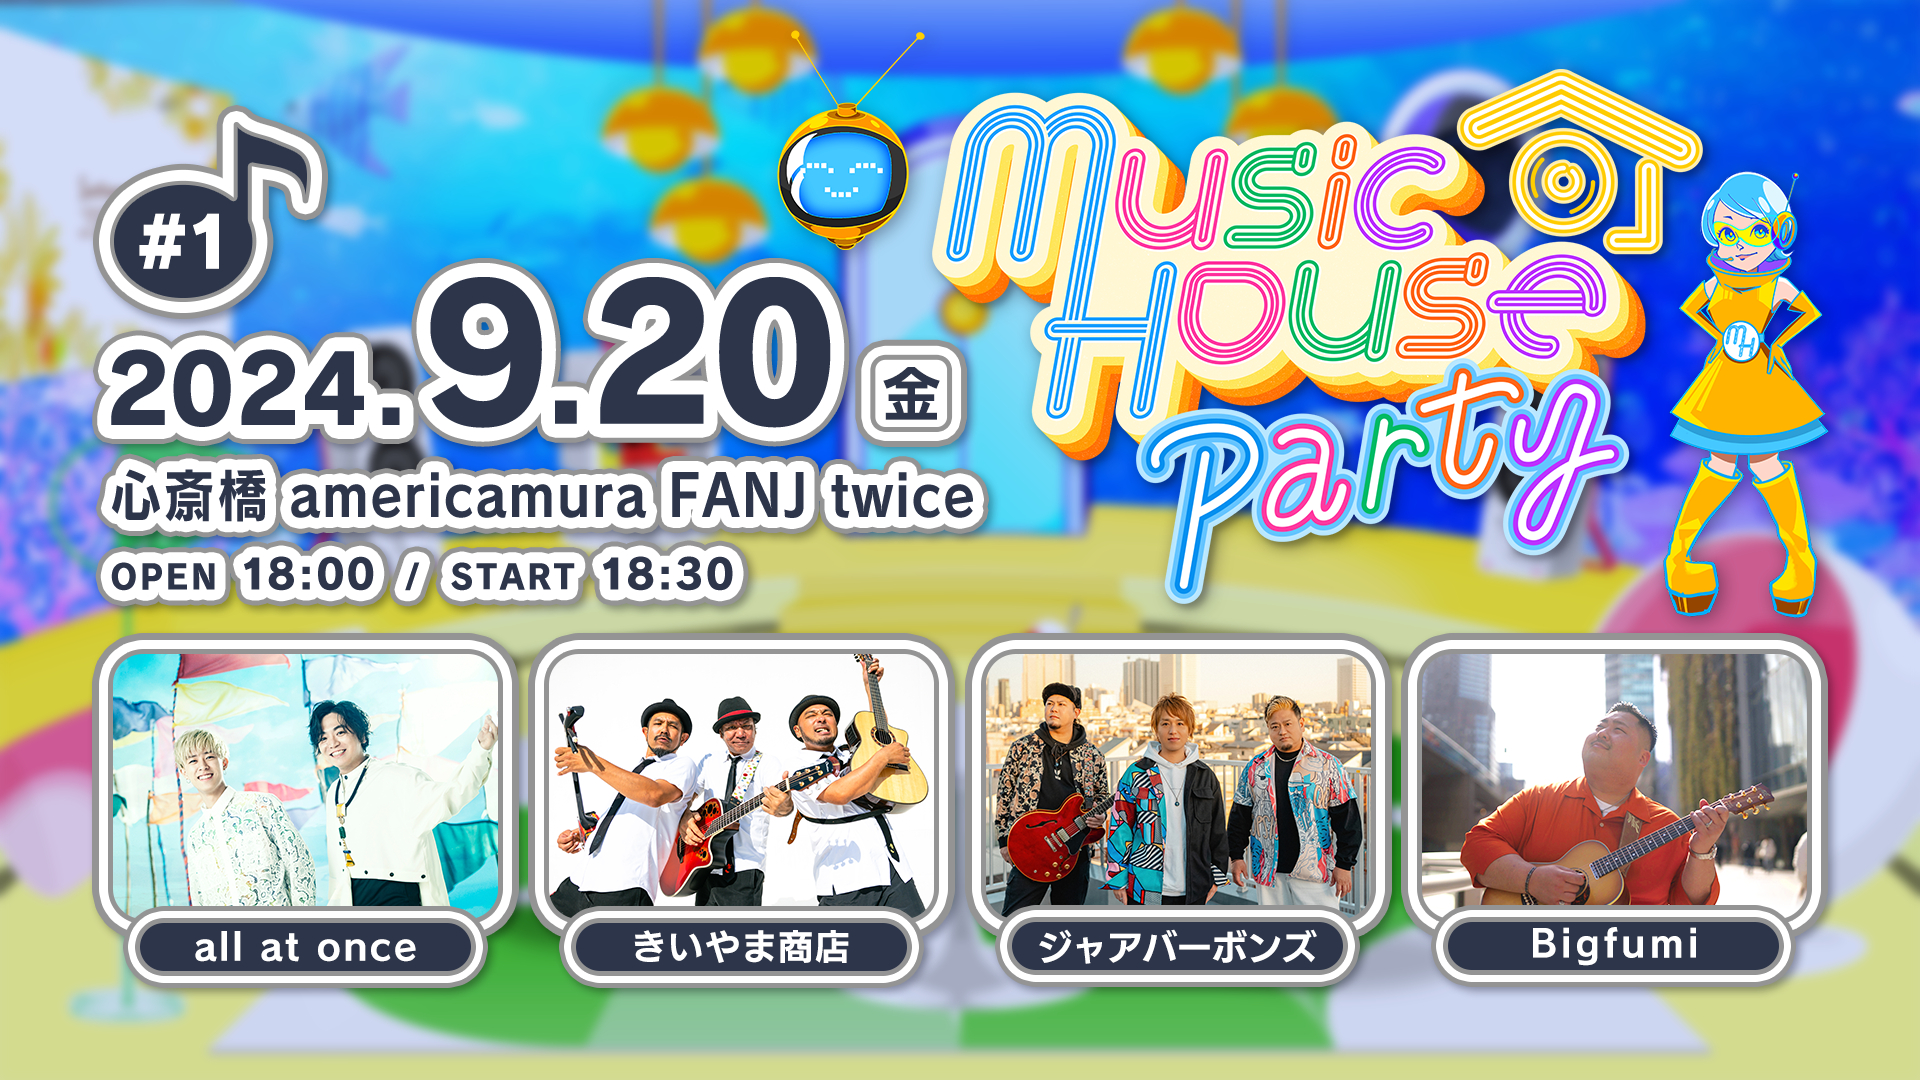 『Music House Party #1』